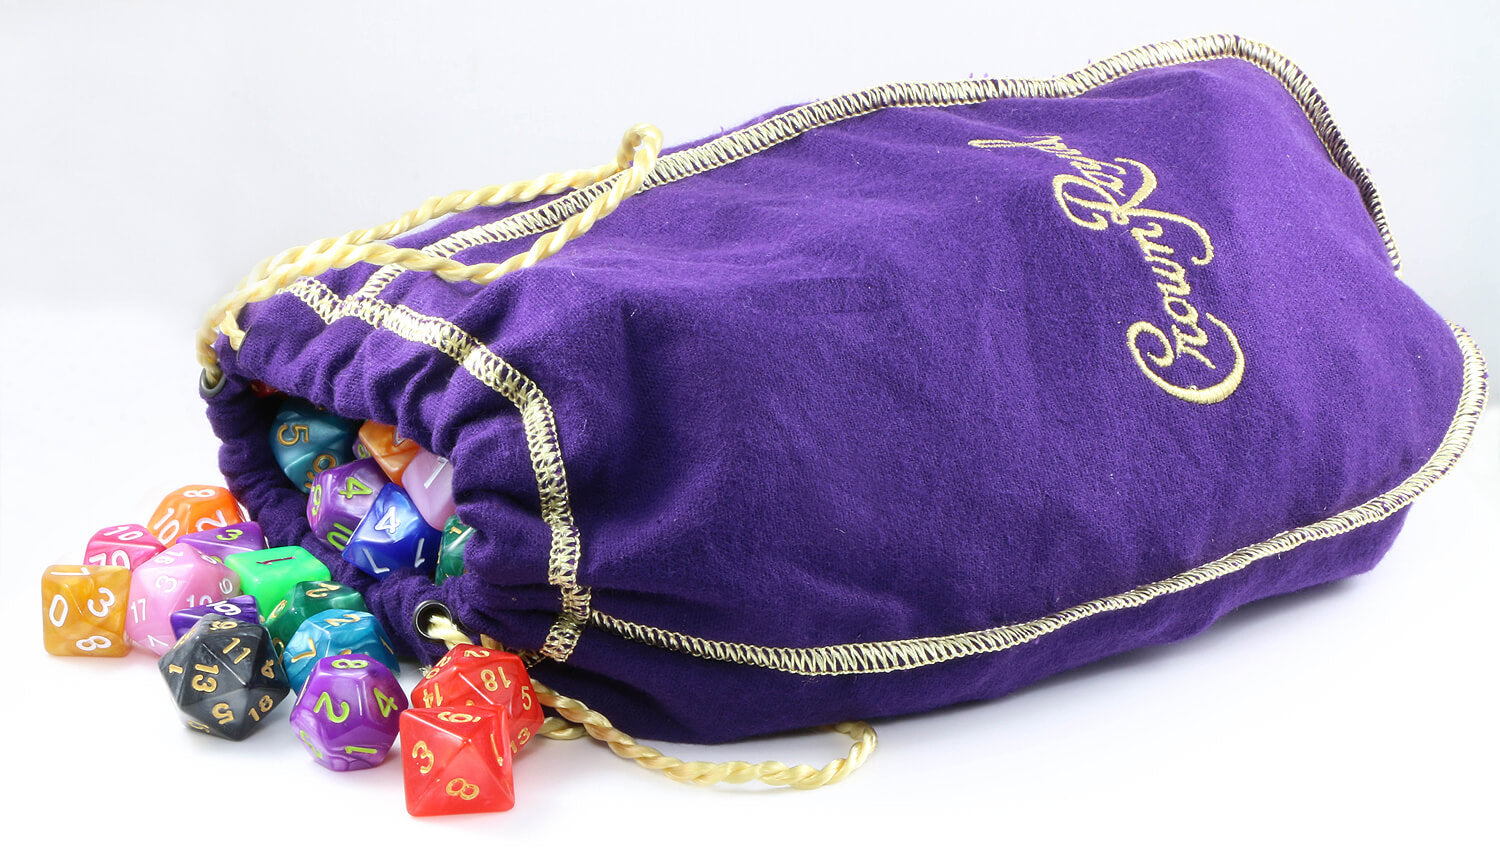 Crown Royal Bags Mini 50ml Shooter Tiny Small Size Choice of Color / Style  4